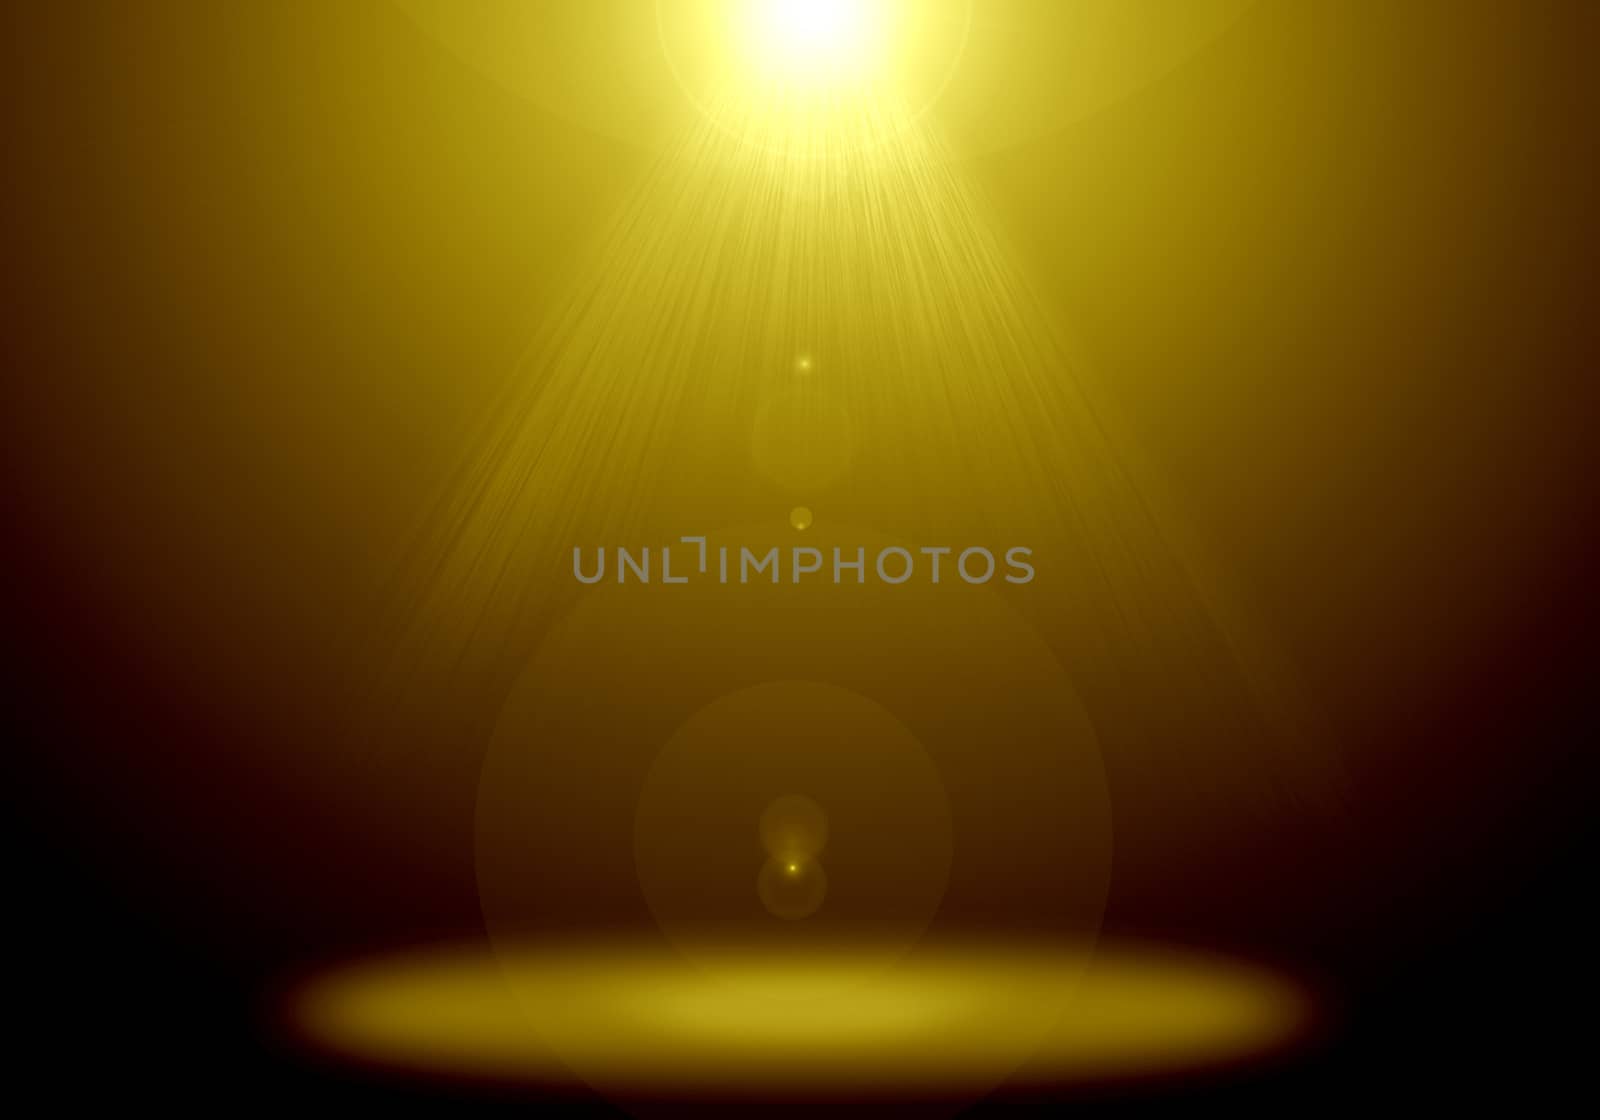 Abstract image of gold lighting flare on the floor stage.